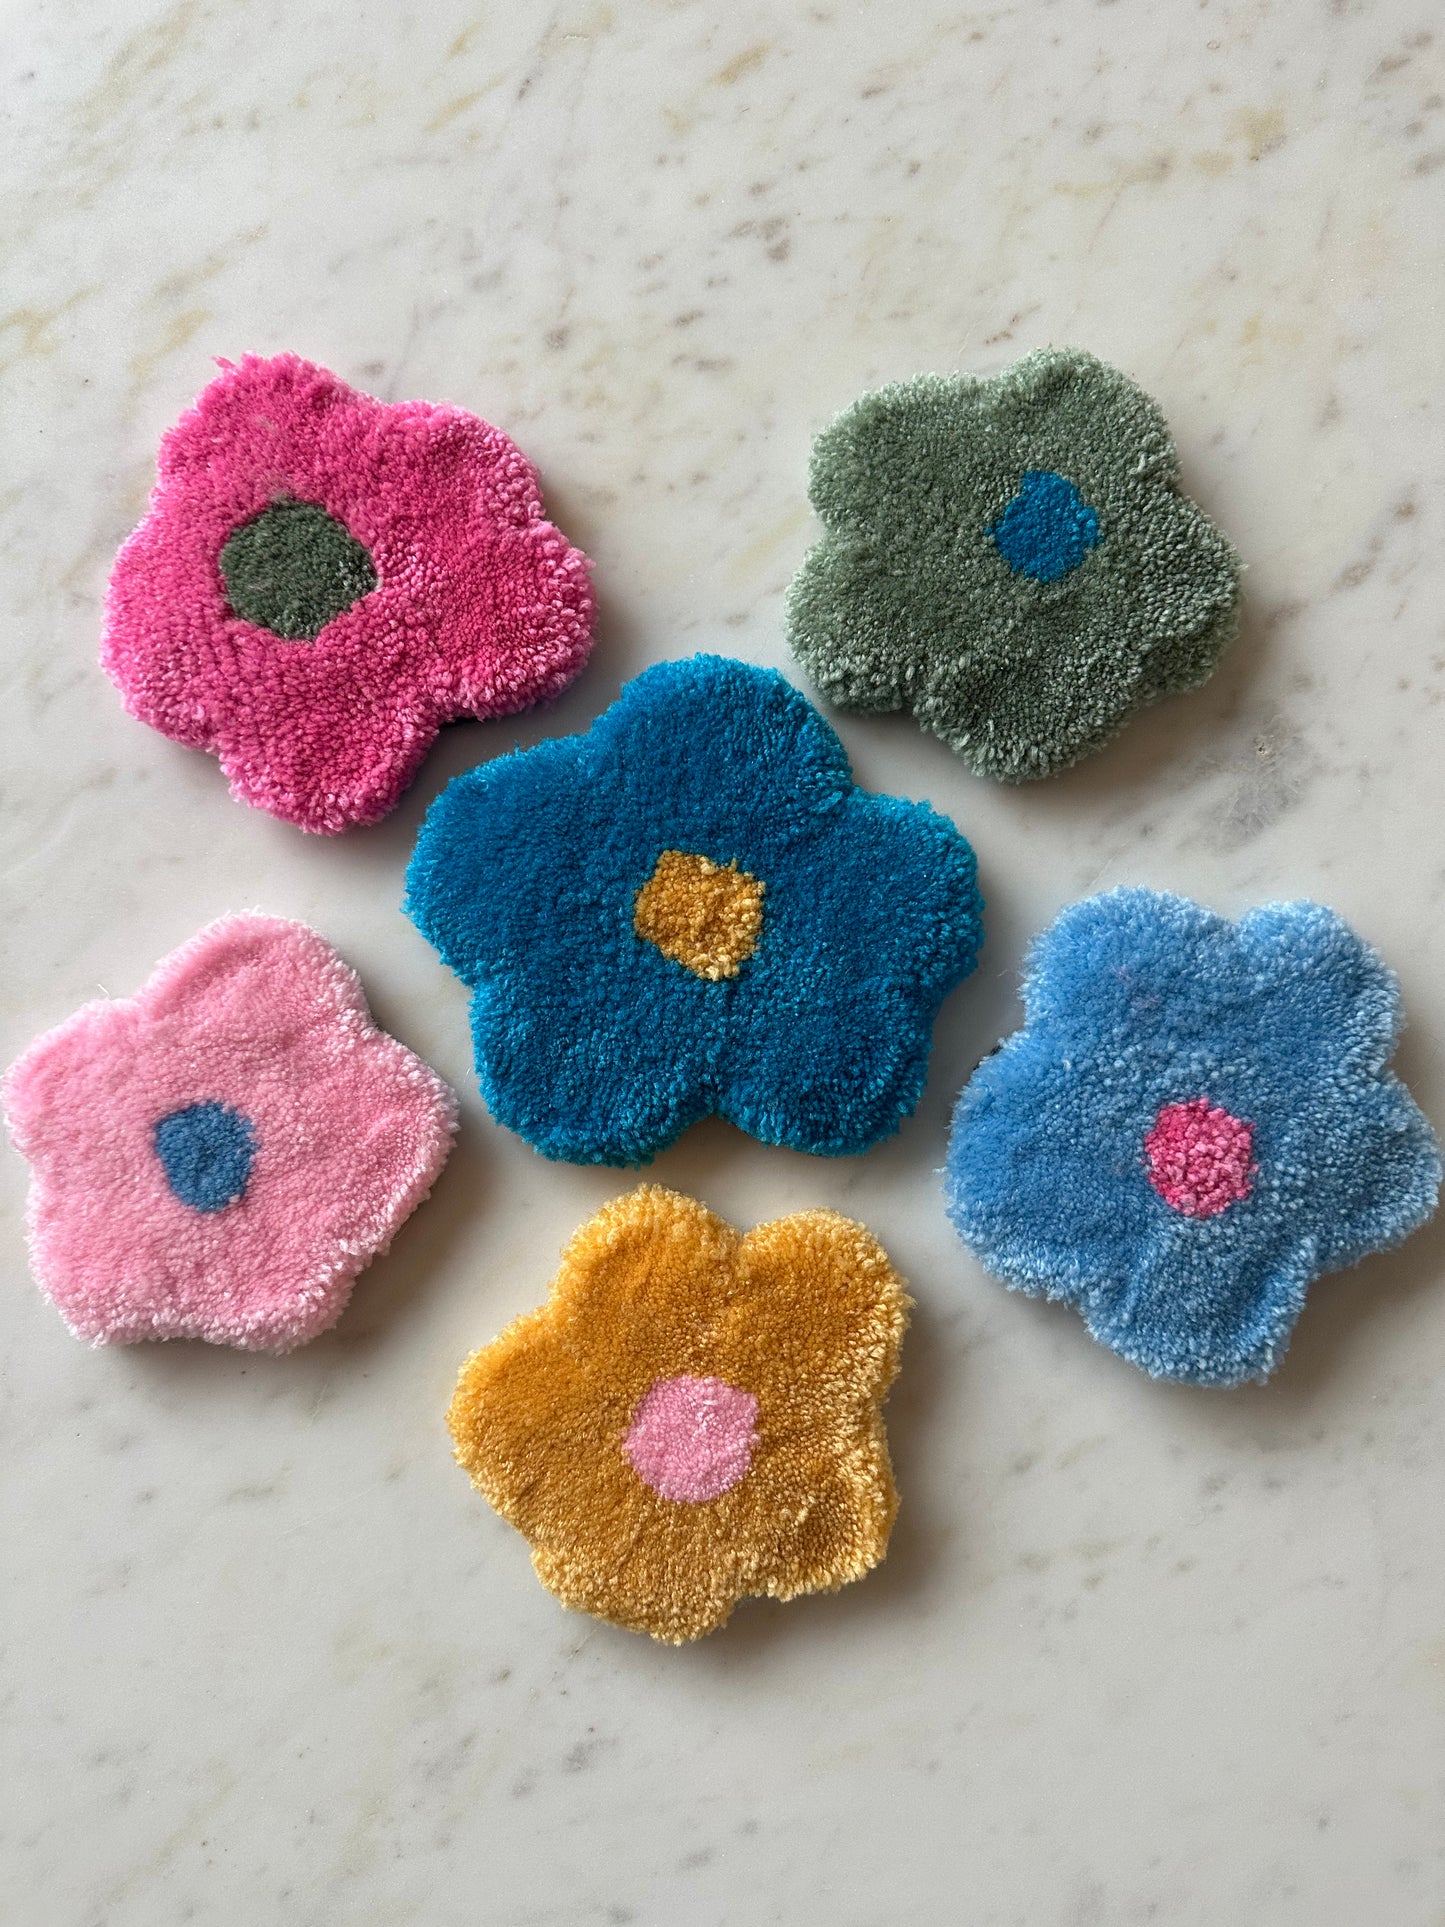 Our tufted flower shaped coasters placed on a table in various color combinations, such as green and blue, pink and green, yellow and pink, pink and blue, blue and pink. Made by The Woollers